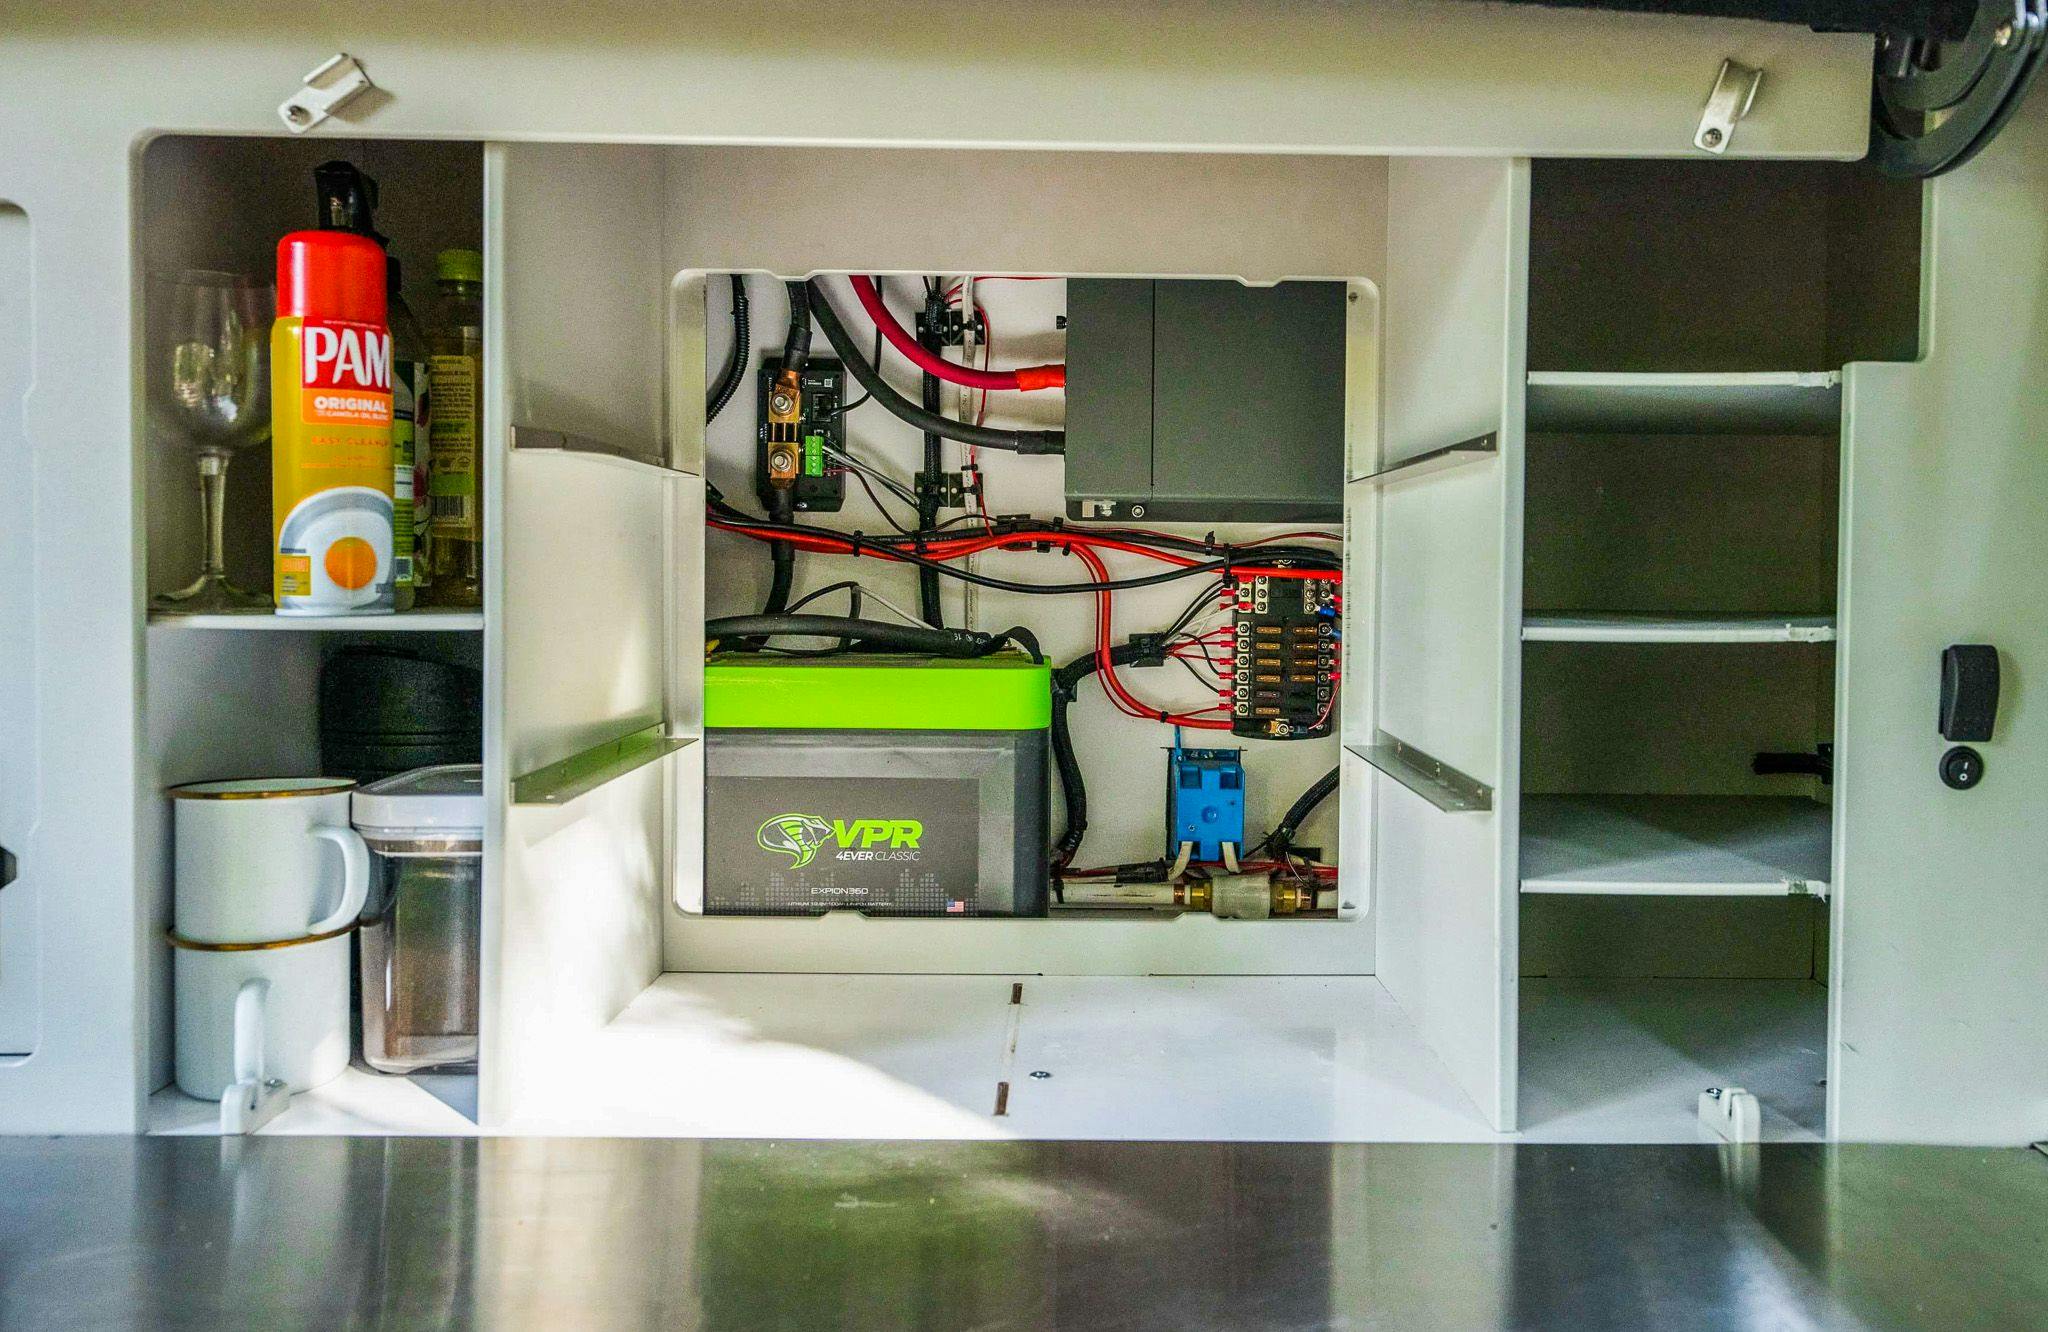 Behind the modular shelving in a teardrop trailer galley, shows the interior mechanicals. This includes a battery setup to power the trailer.